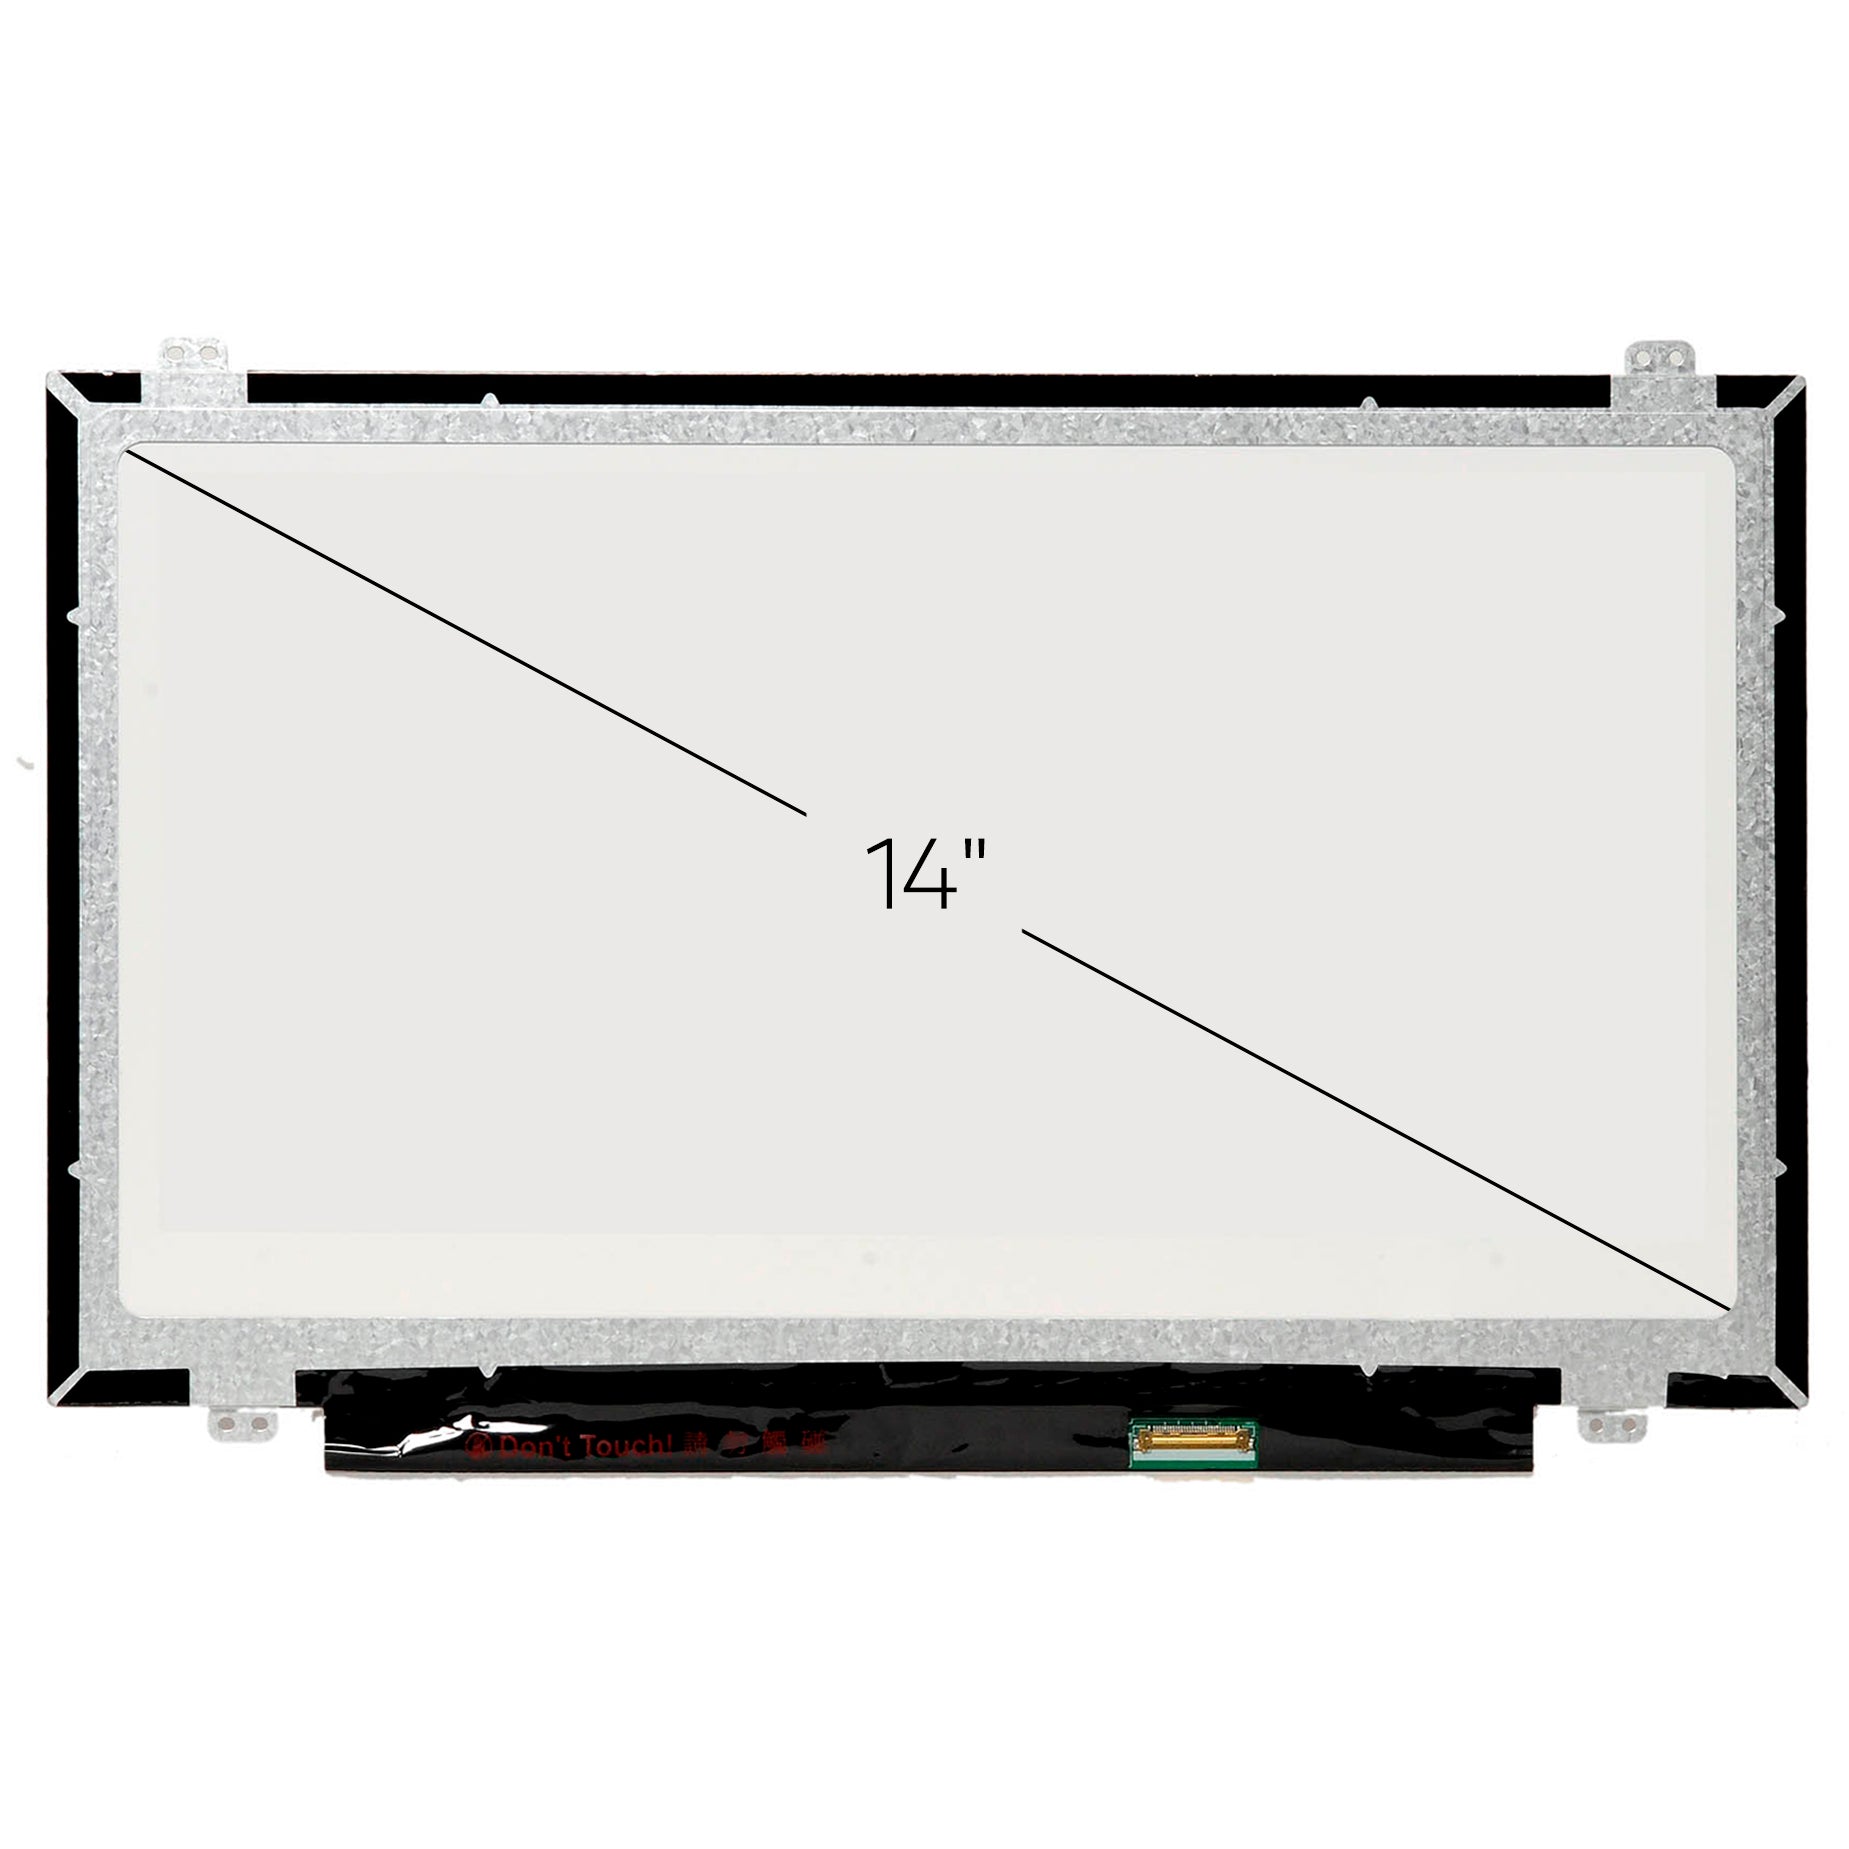 Screen Replacement for G140XTN01.0 HD 1366x768 Glossy LCD LED Display